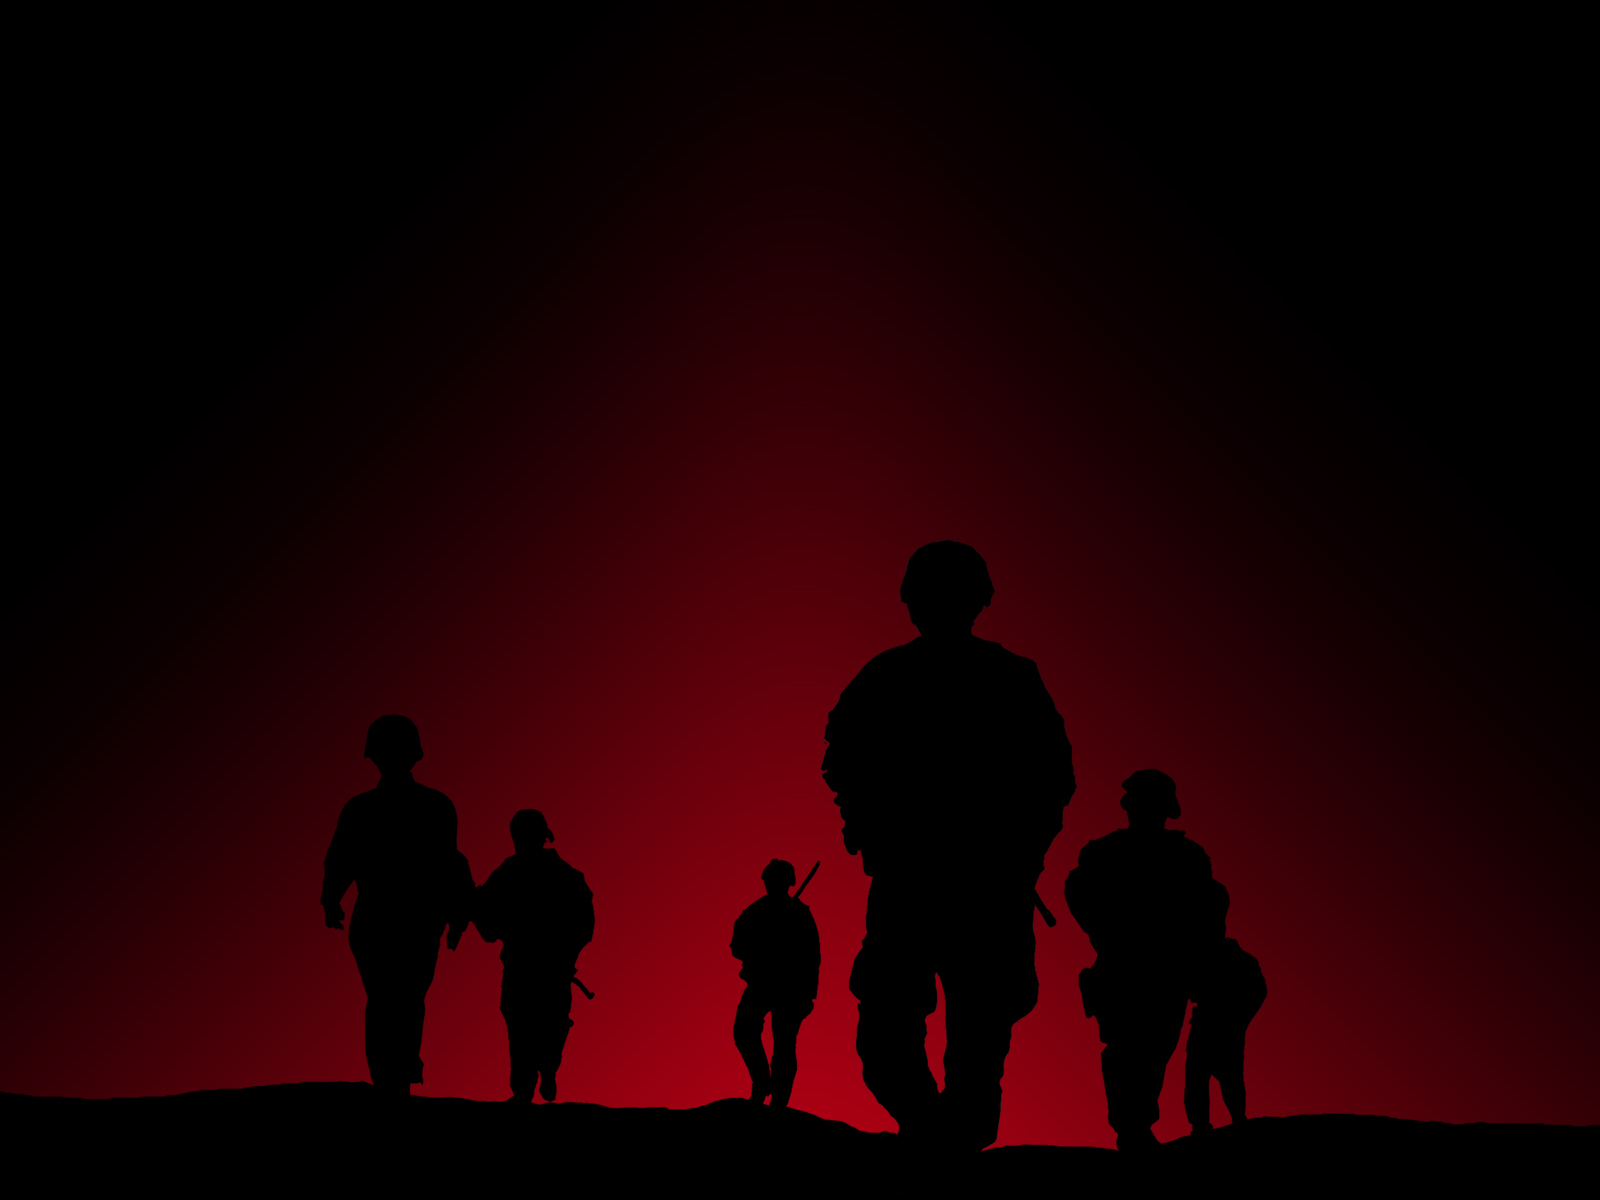 Wallpaper Soldiers Red and Black Backgrounds